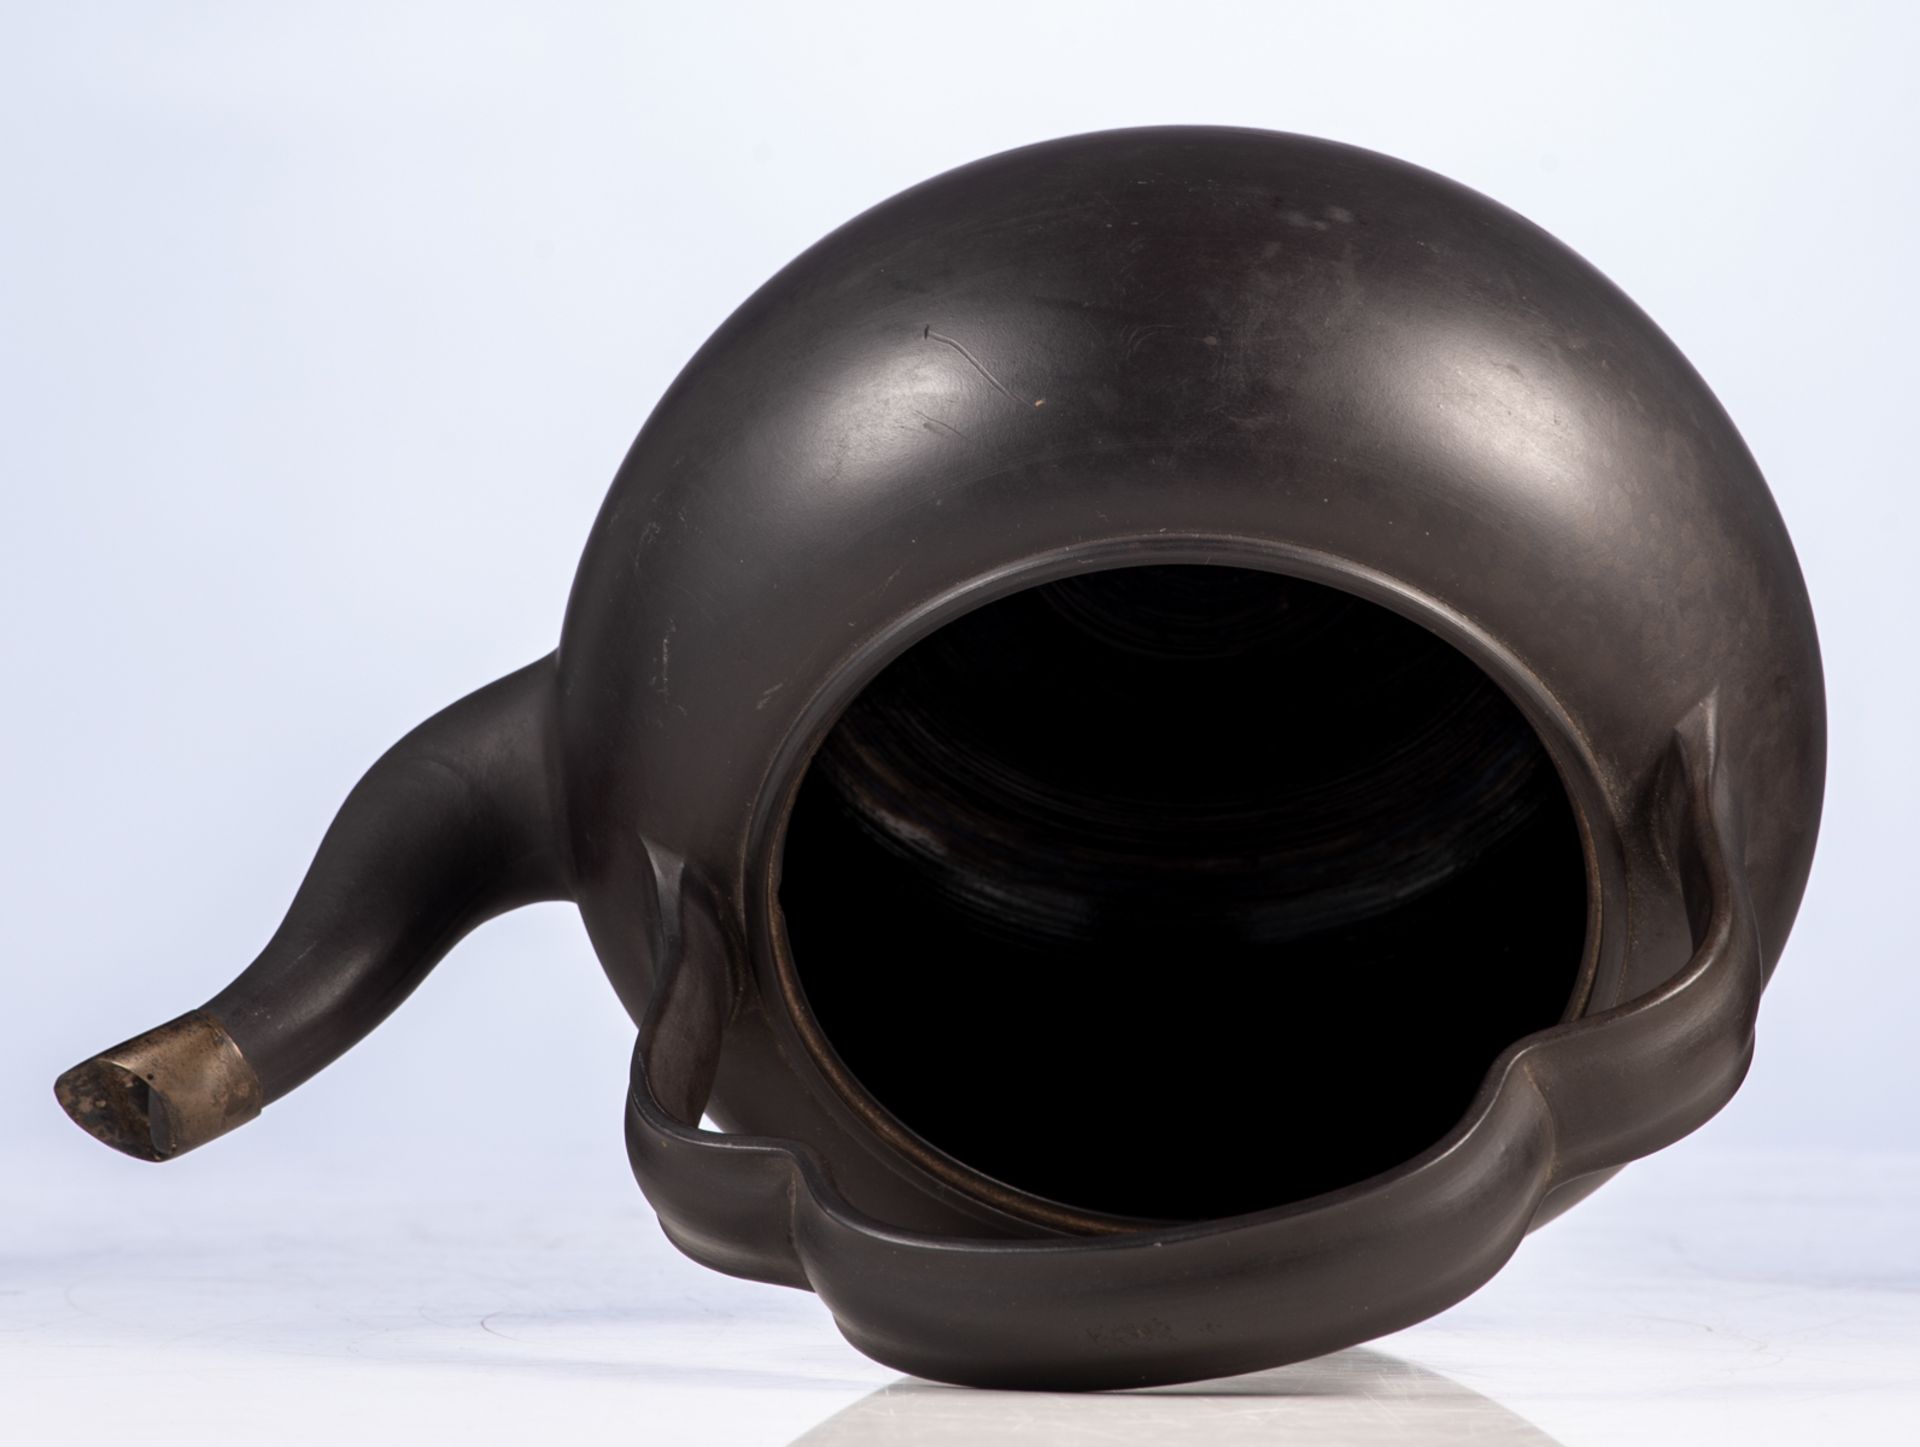 An English black basalt teakettle with a lobed bail handle, a Sybil knop and a silver cap on the - Image 6 of 8